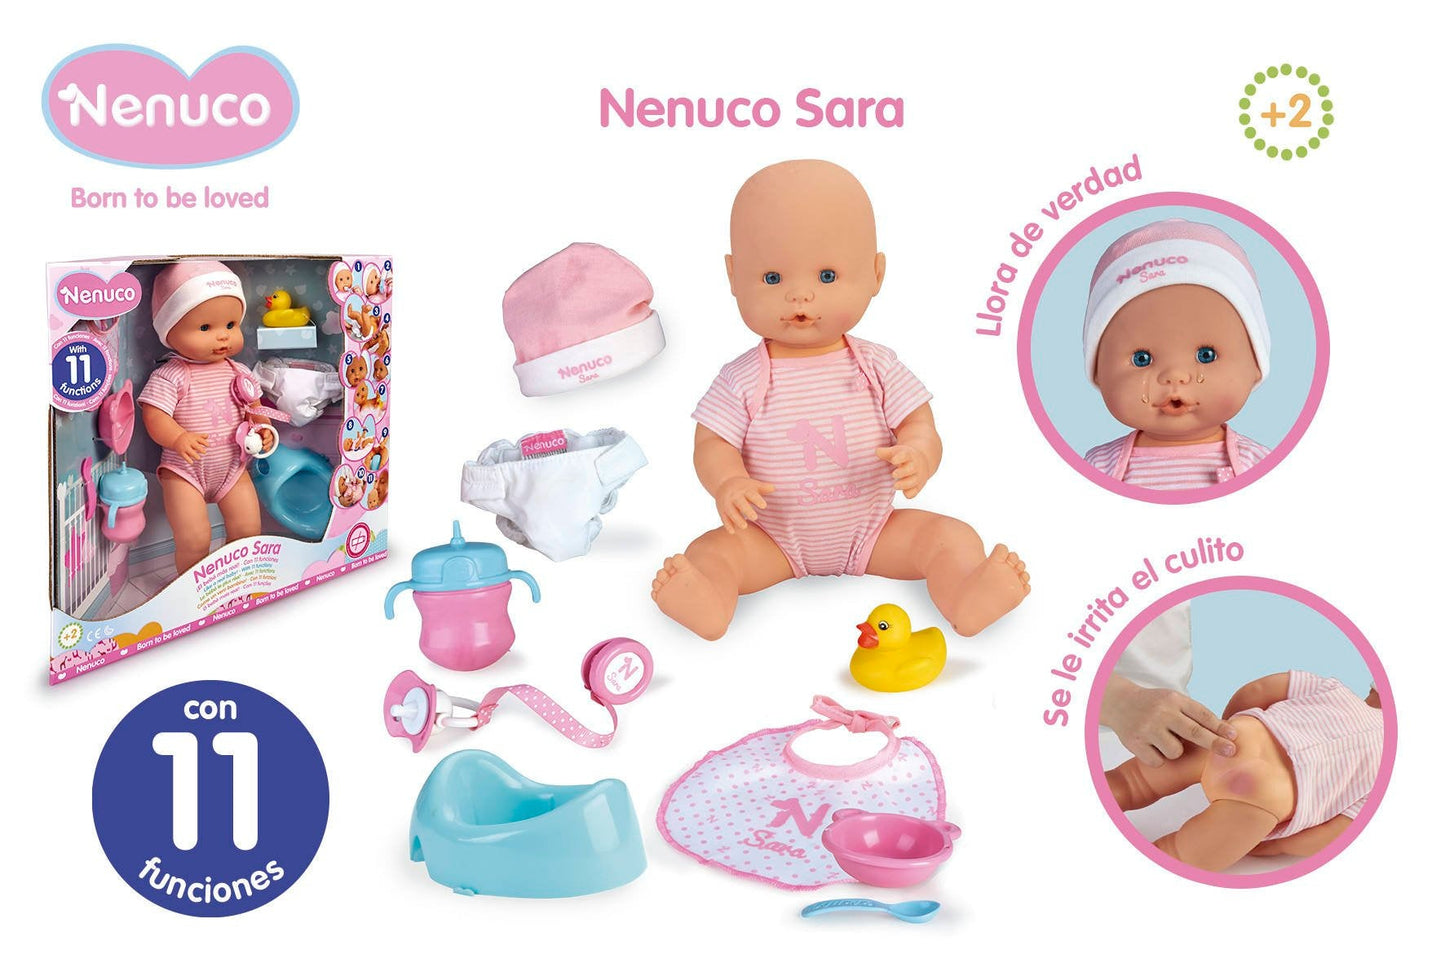 Nenuco Sara Soft Baby Doll with 11 Real Life Functions